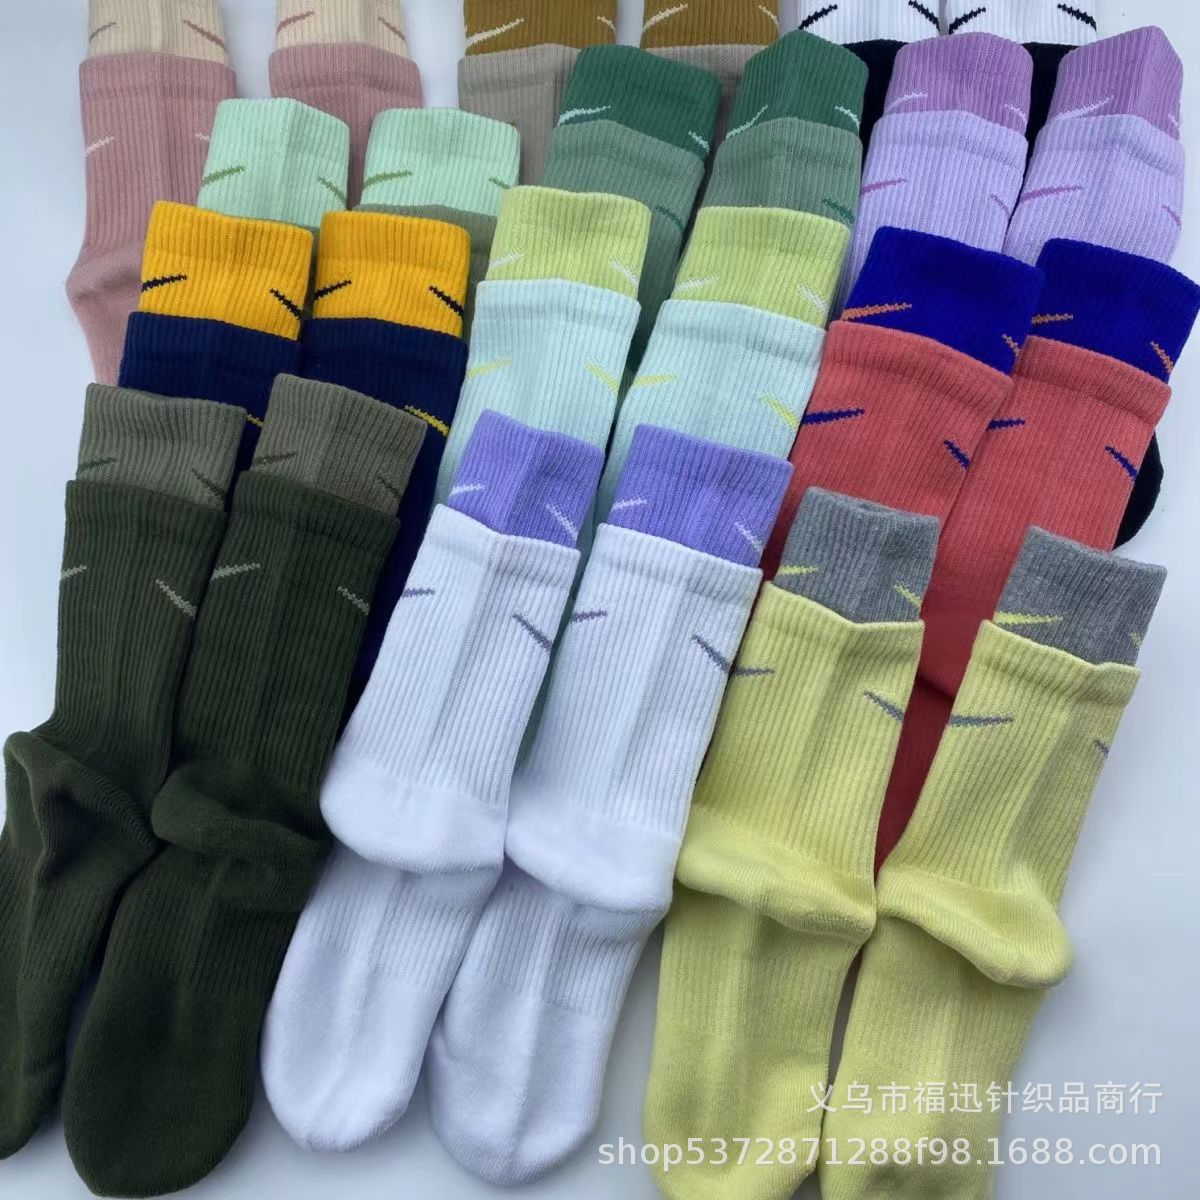 Suwannike Socks Men and Women Middle High Tube Double Layer Color Contrast Patchwork Hook Towel Bottom Sports Casual Cotton Socks